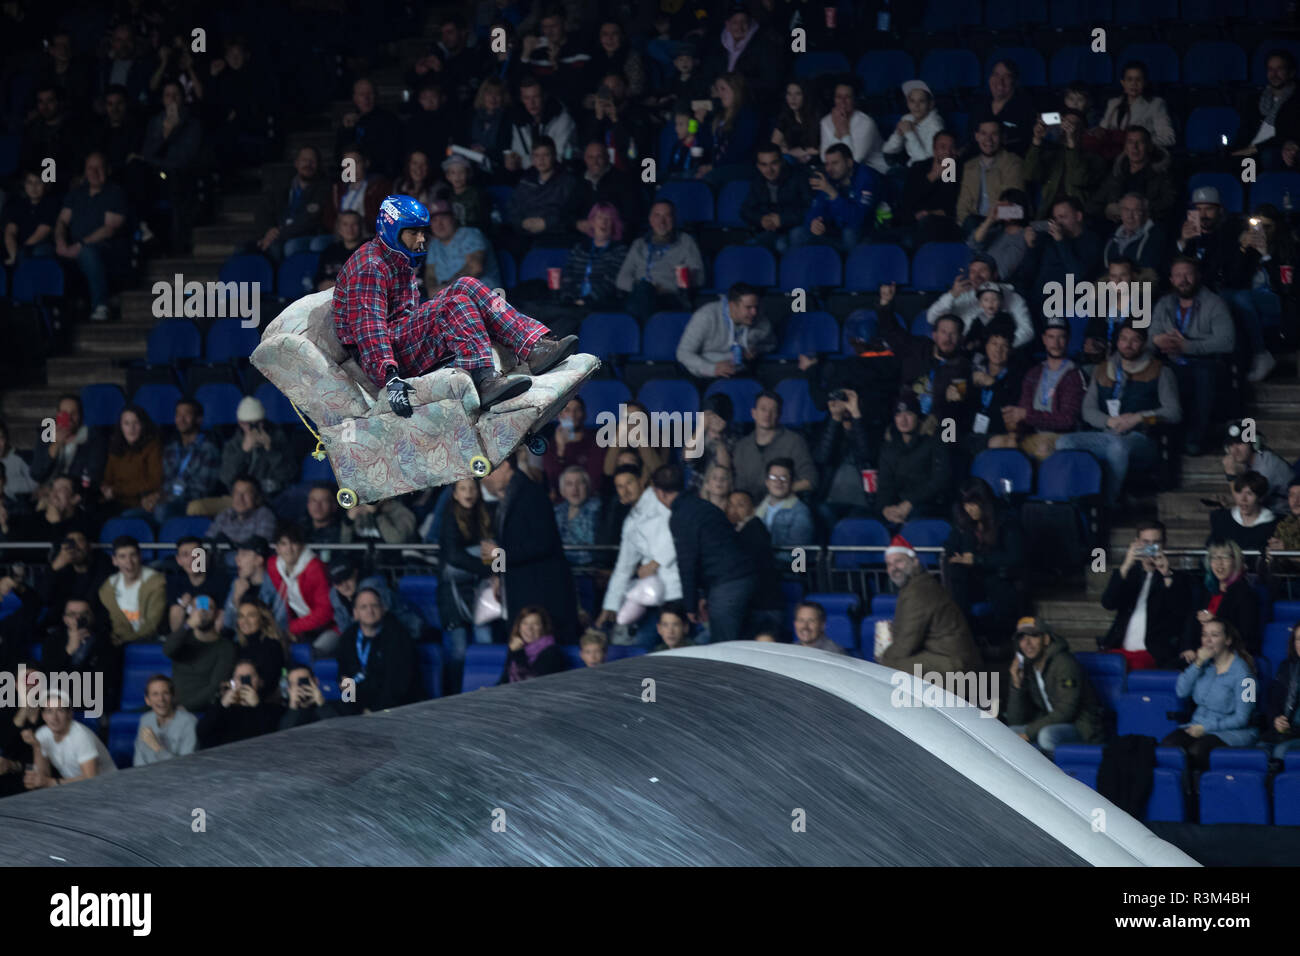 London, UK. 23rd Nov, 2018.Nitro Circus Live 2018, breathtaking choreographed  routines for FMX, BMX and Skate. Riders will execute moves such as the Nitro Bomb and use the 40-foot Giganta ramp during the show at the O2 Arena, Uk, Credit: Jason Richardson/Alamy Live News Stock Photo